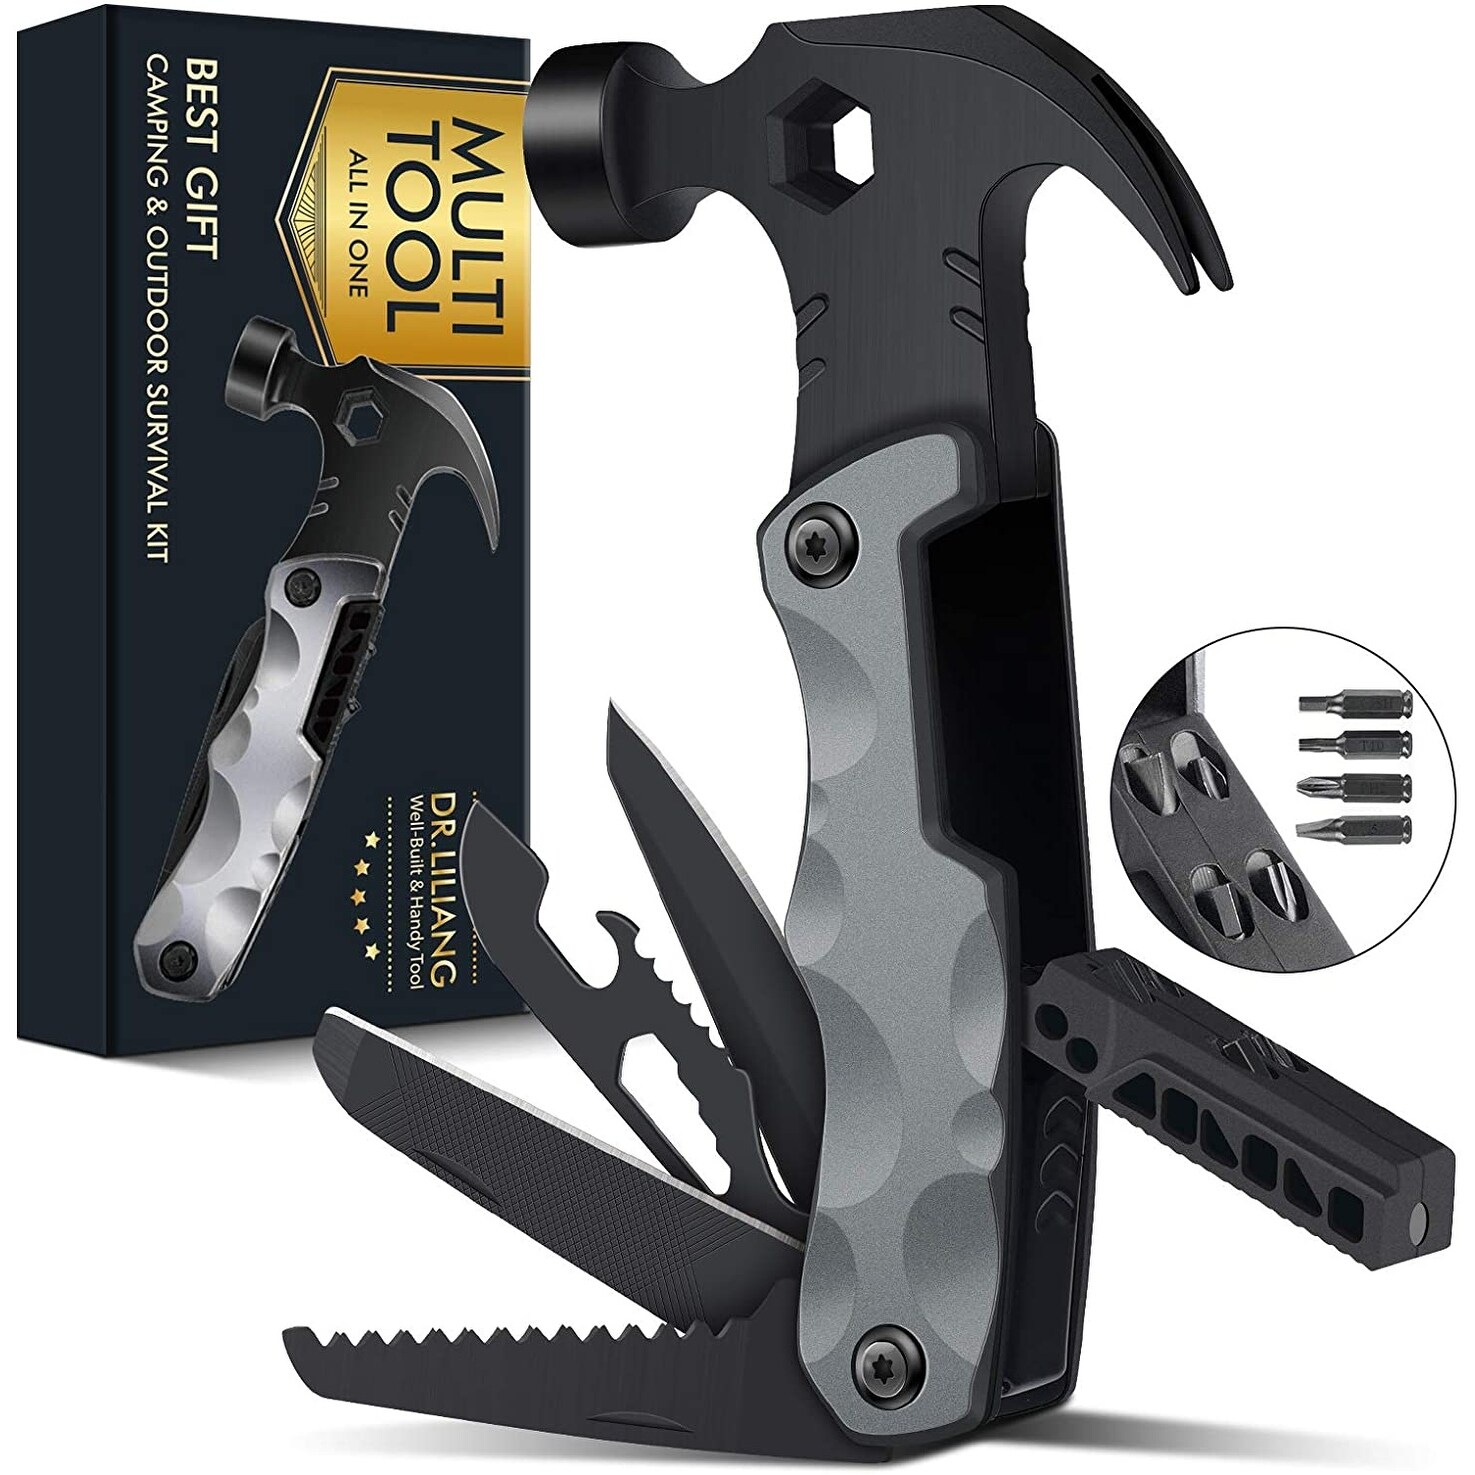 ETCBUYS Multitool Camping Accessories for Men Dad Grandpa - Bed